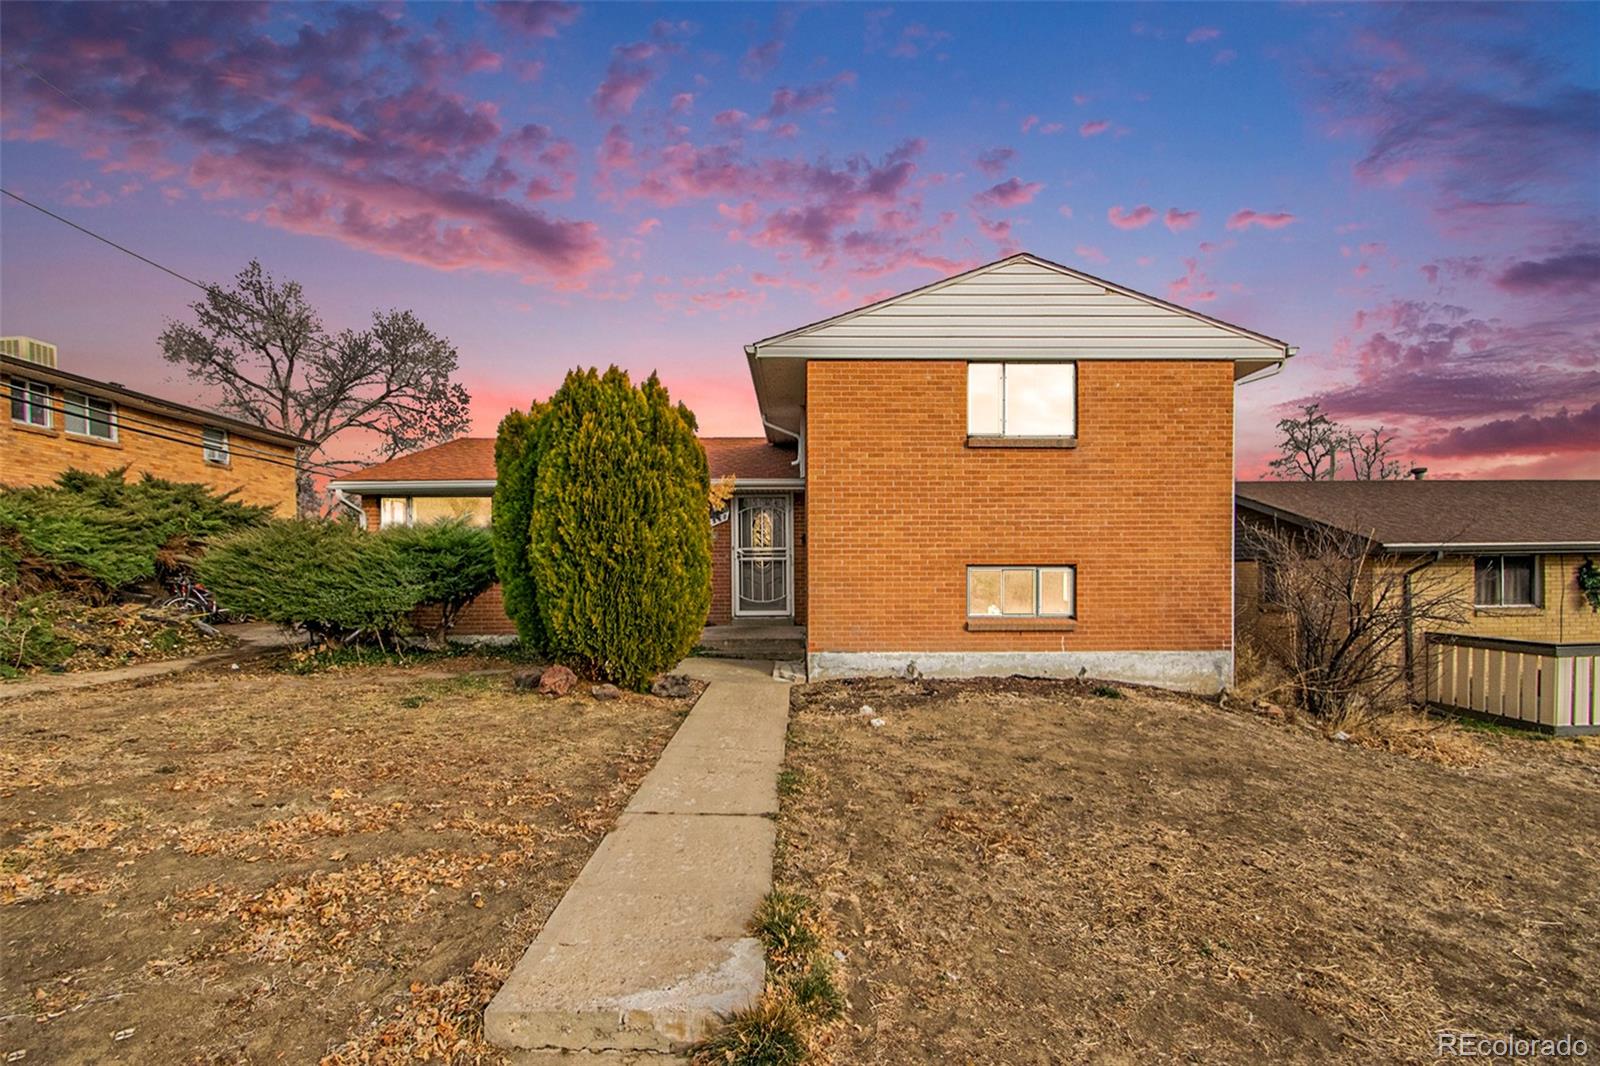 8360  emerson street, denver sold home. Closed on 2024-02-05 for $457,000.